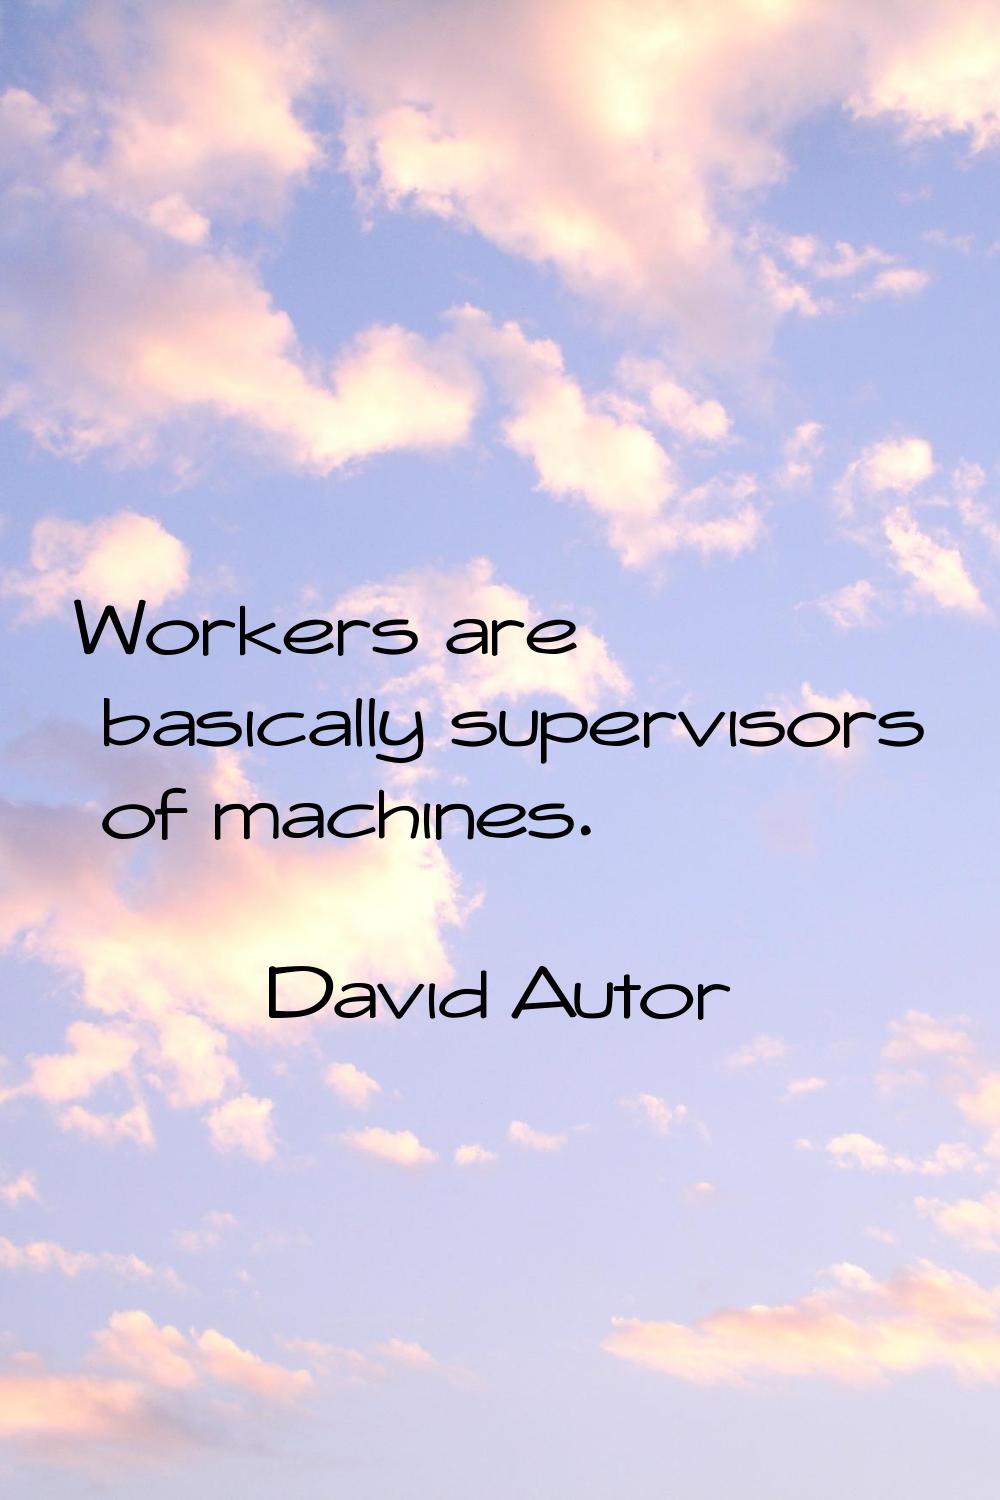 Workers are basically supervisors of machines.